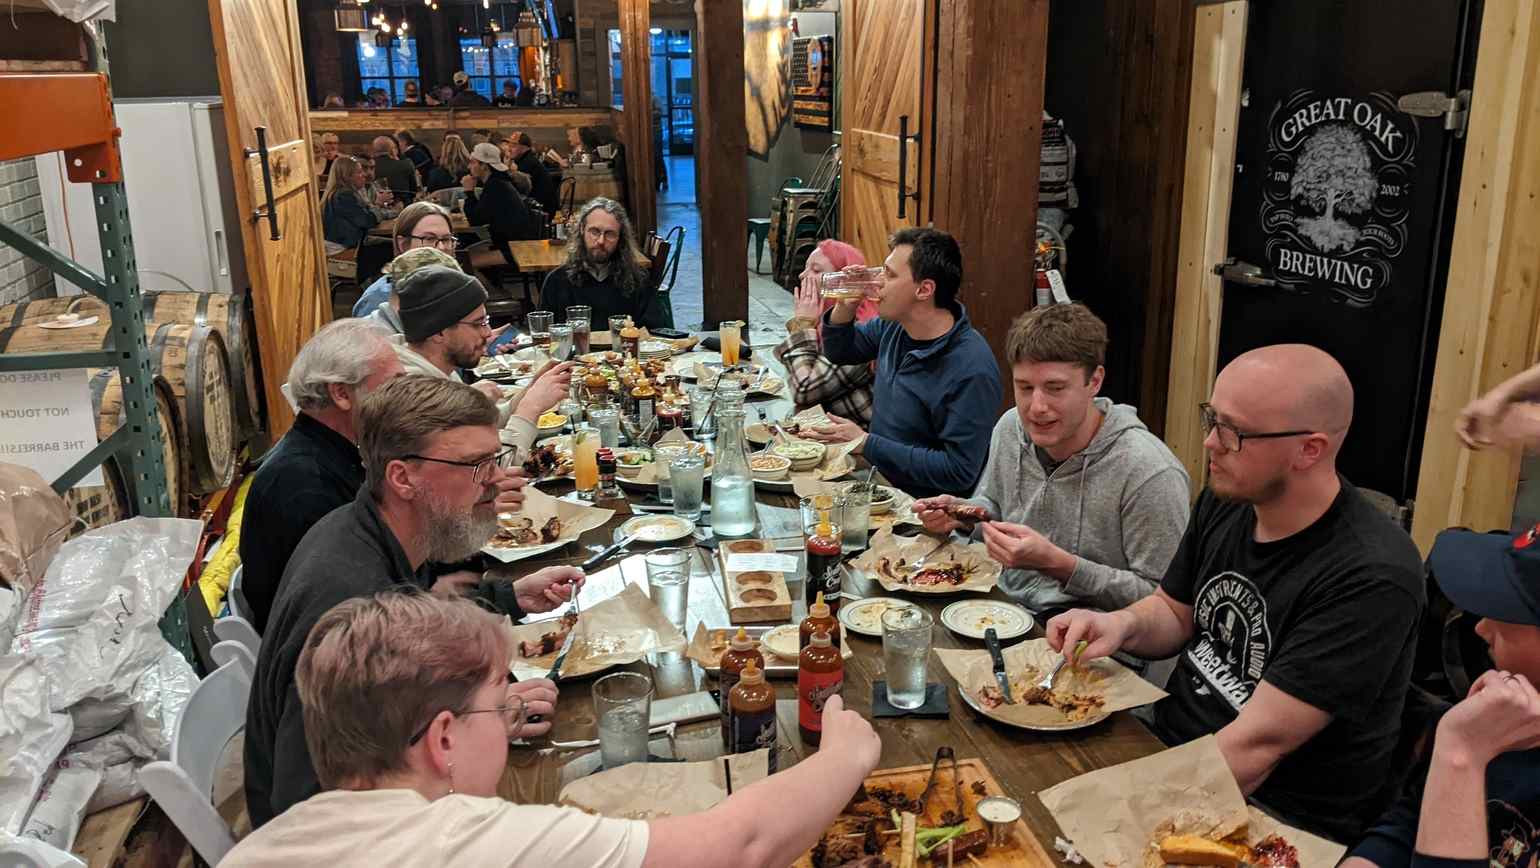 Dinner. End Pointers are gathered around a large restaurant table, with lots of hearty food in front of them, midway through the meal. A sign in the background reads “Great Oak Brewing”.